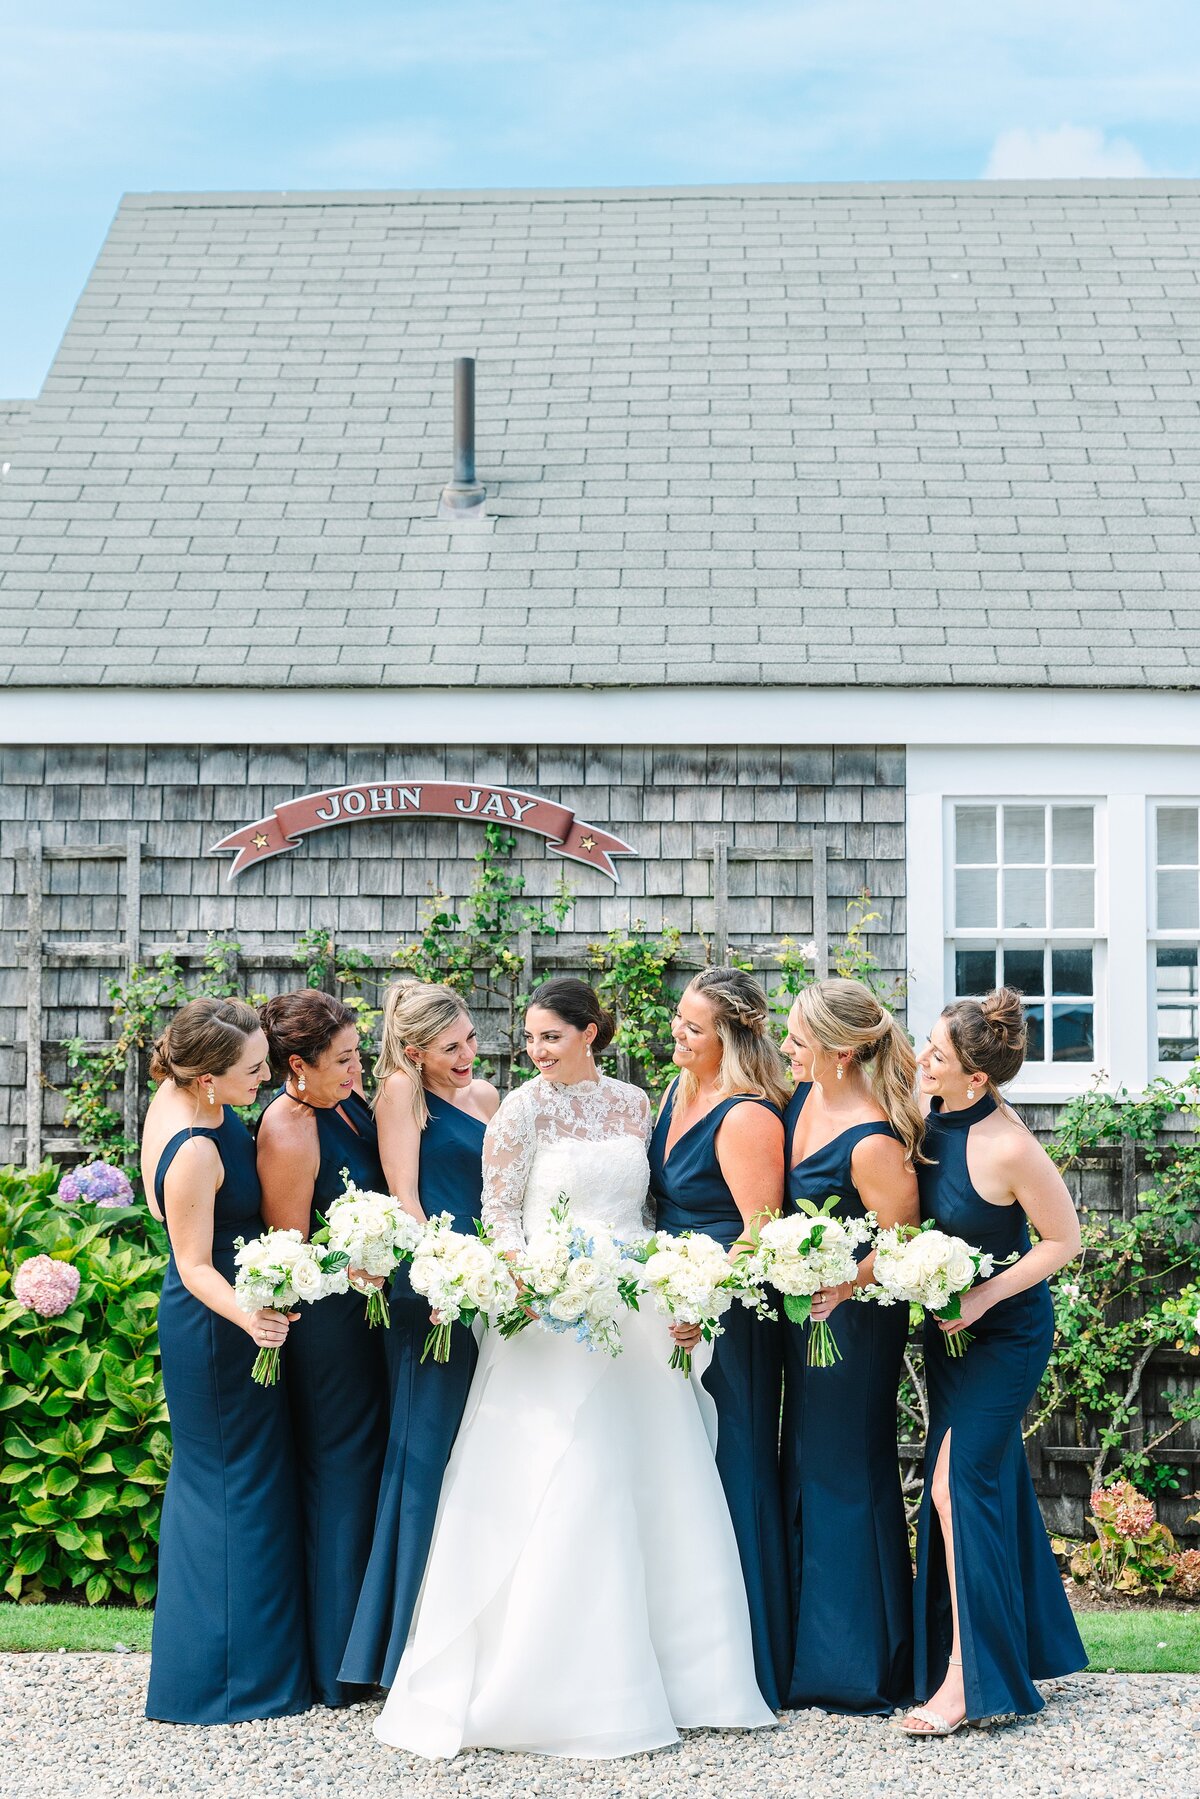 bride with bridesmaids in navy dresses with white bouquets